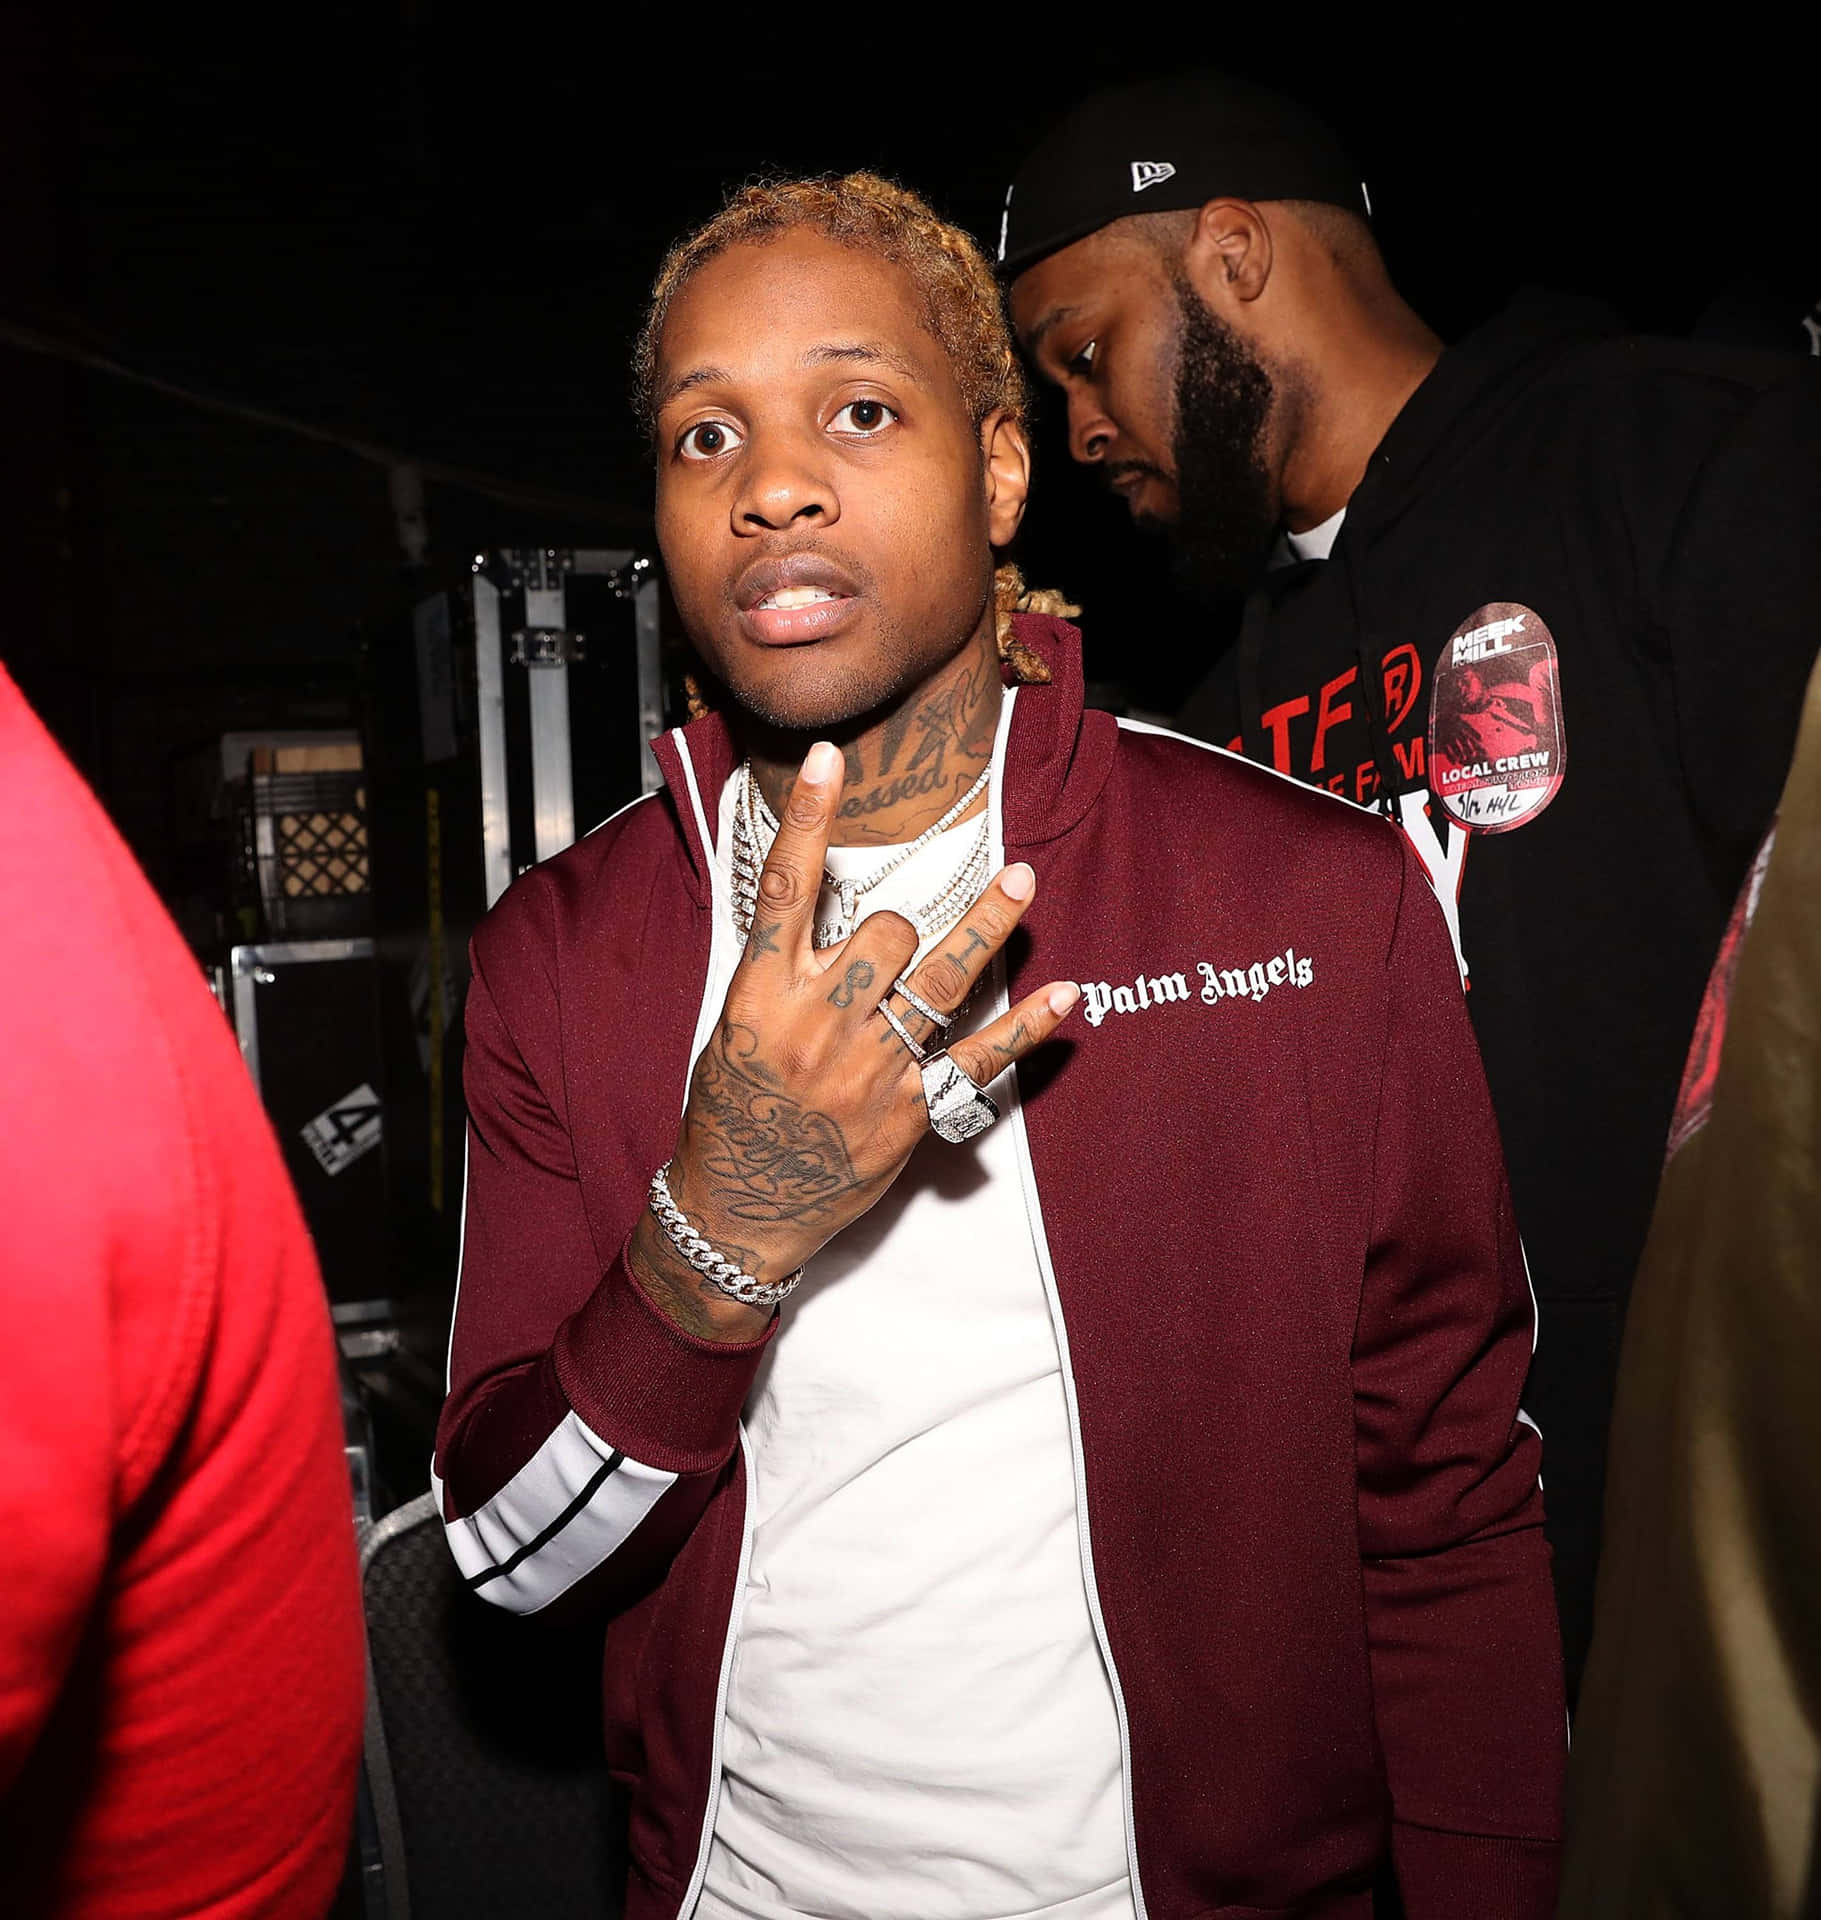 Chicago native Lil Durk performing for his fans